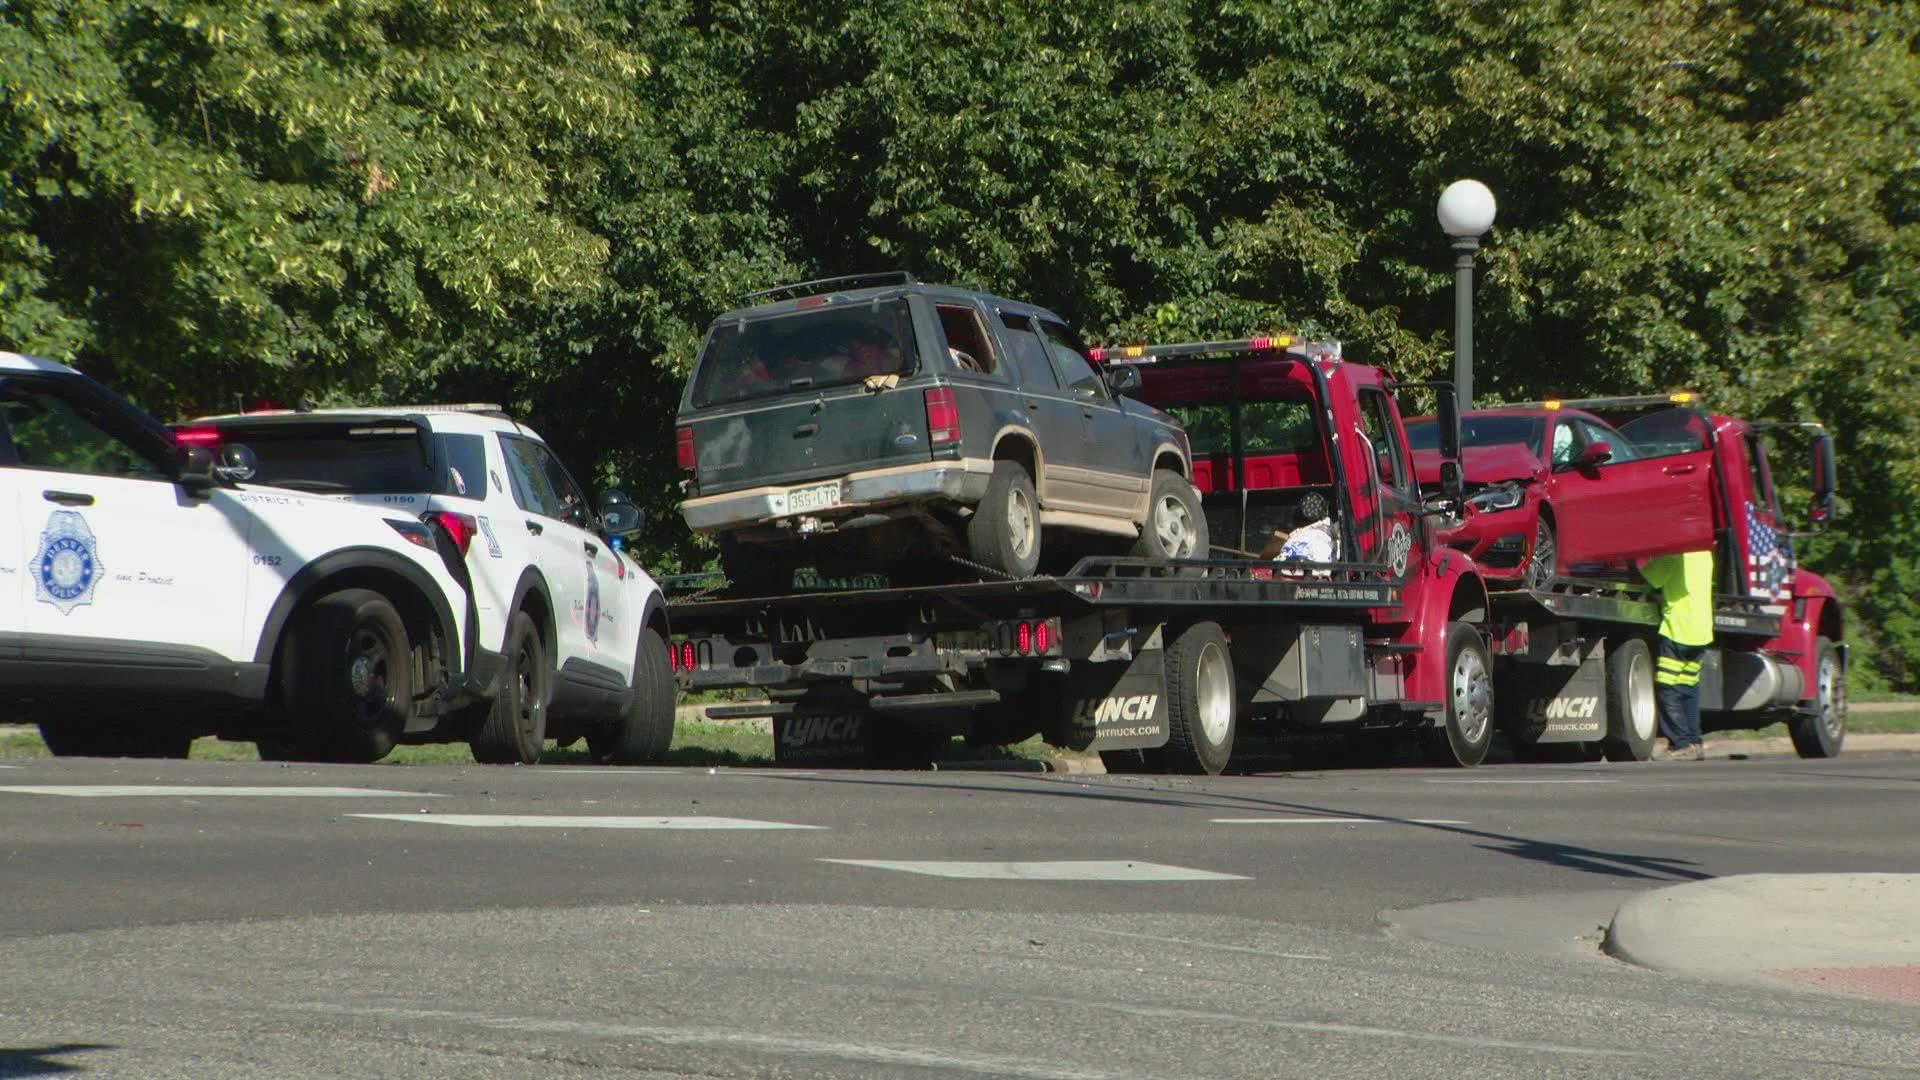 Police said the crash happened at West 11th Avenue and North Speer Boulevard on Saturday morning.